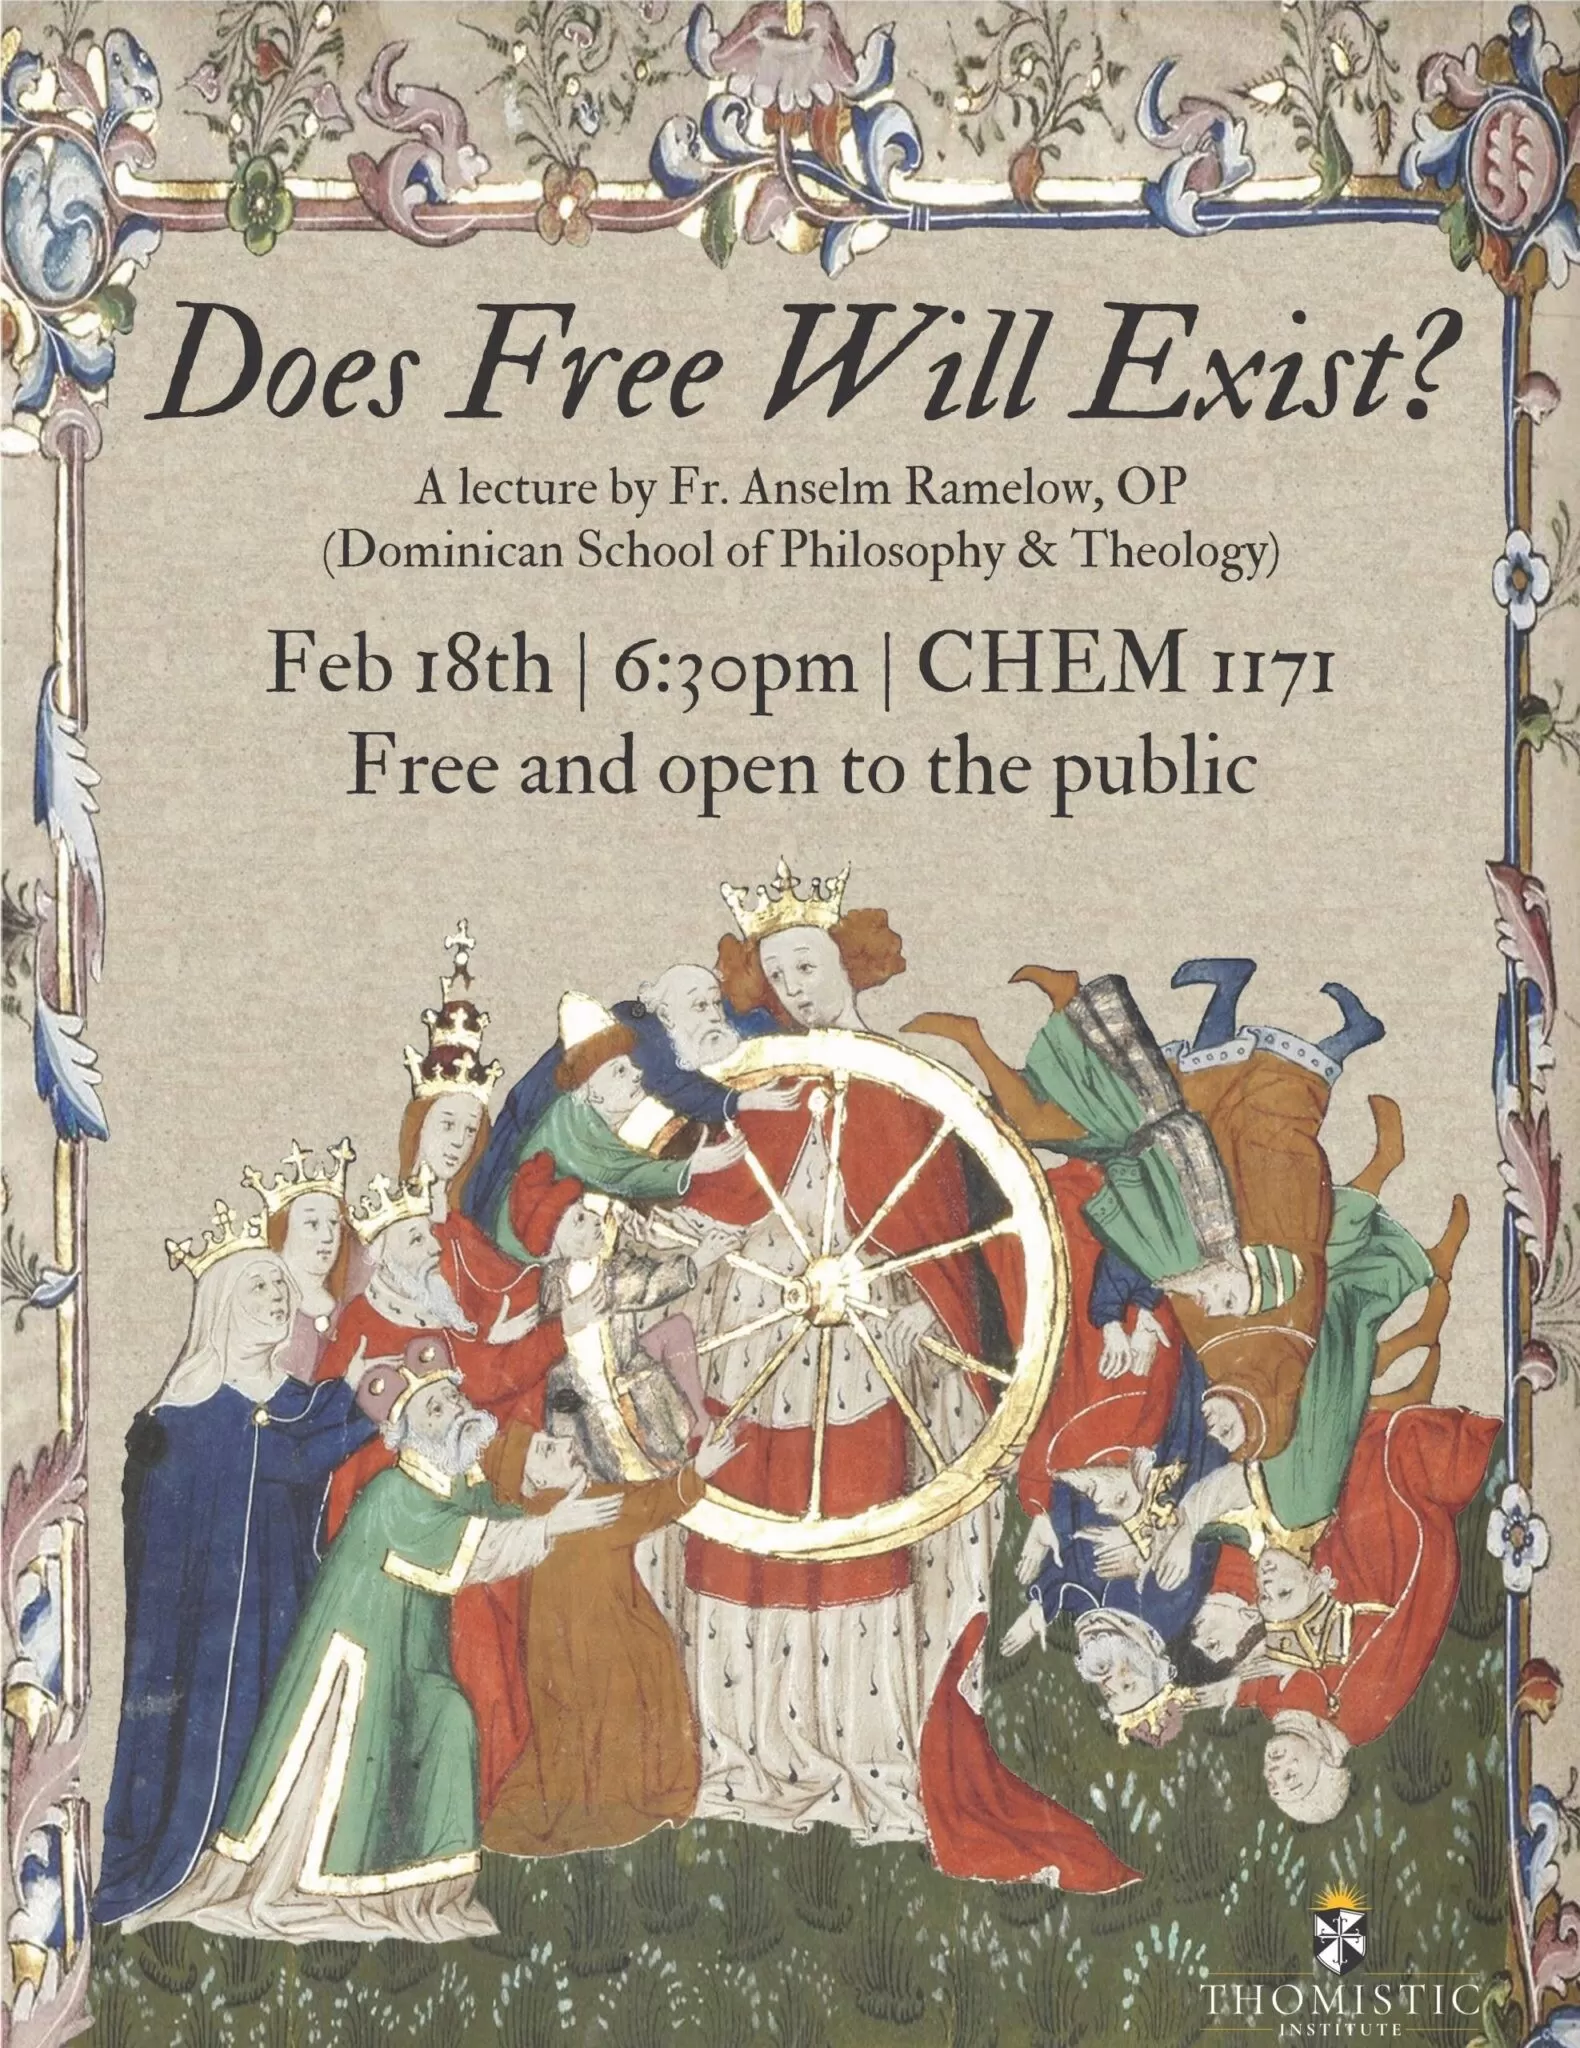 'Does Freewill Exist?' Lecture by Fr. Anselm Ramelow, O.P.